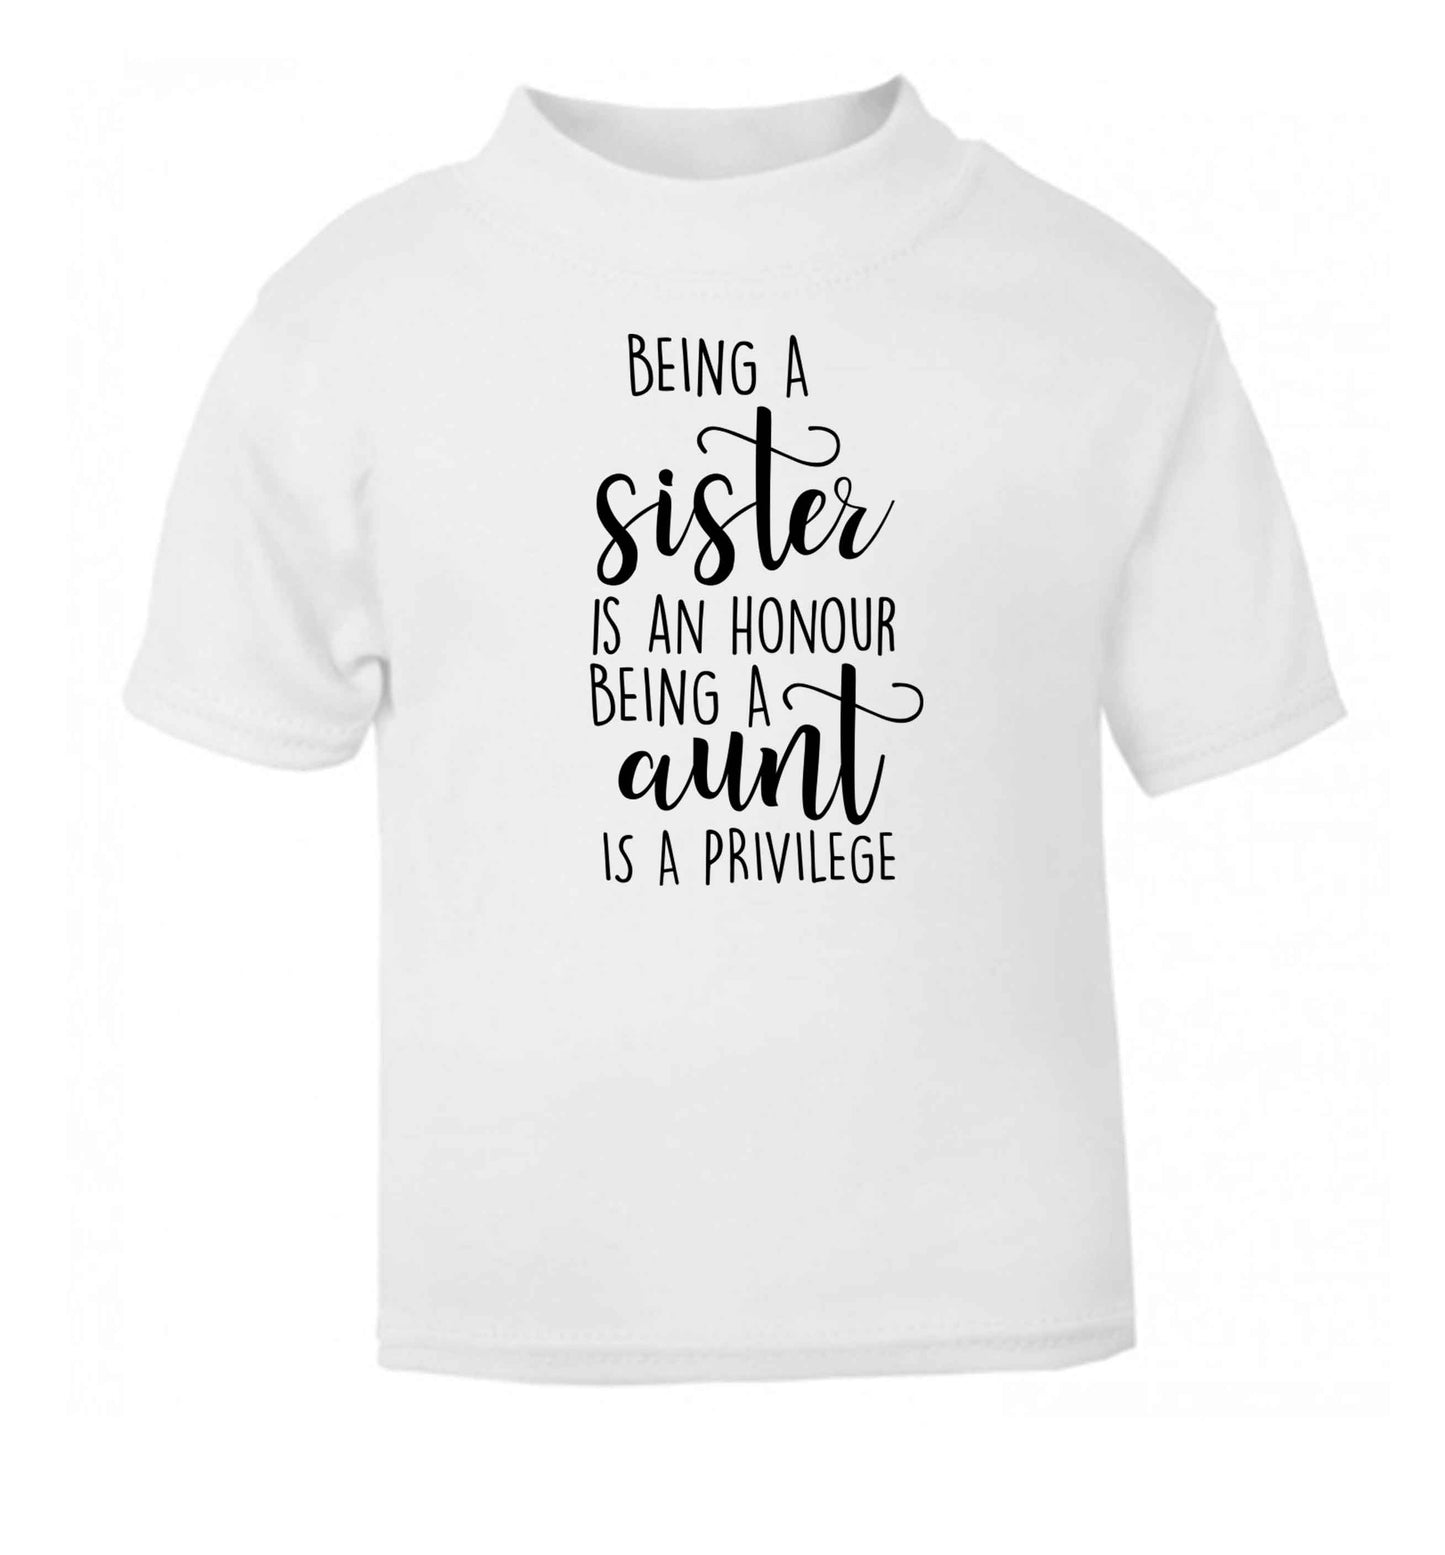 Being a sister is an honour being an auntie is a privilege white Baby Toddler Tshirt 2 Years